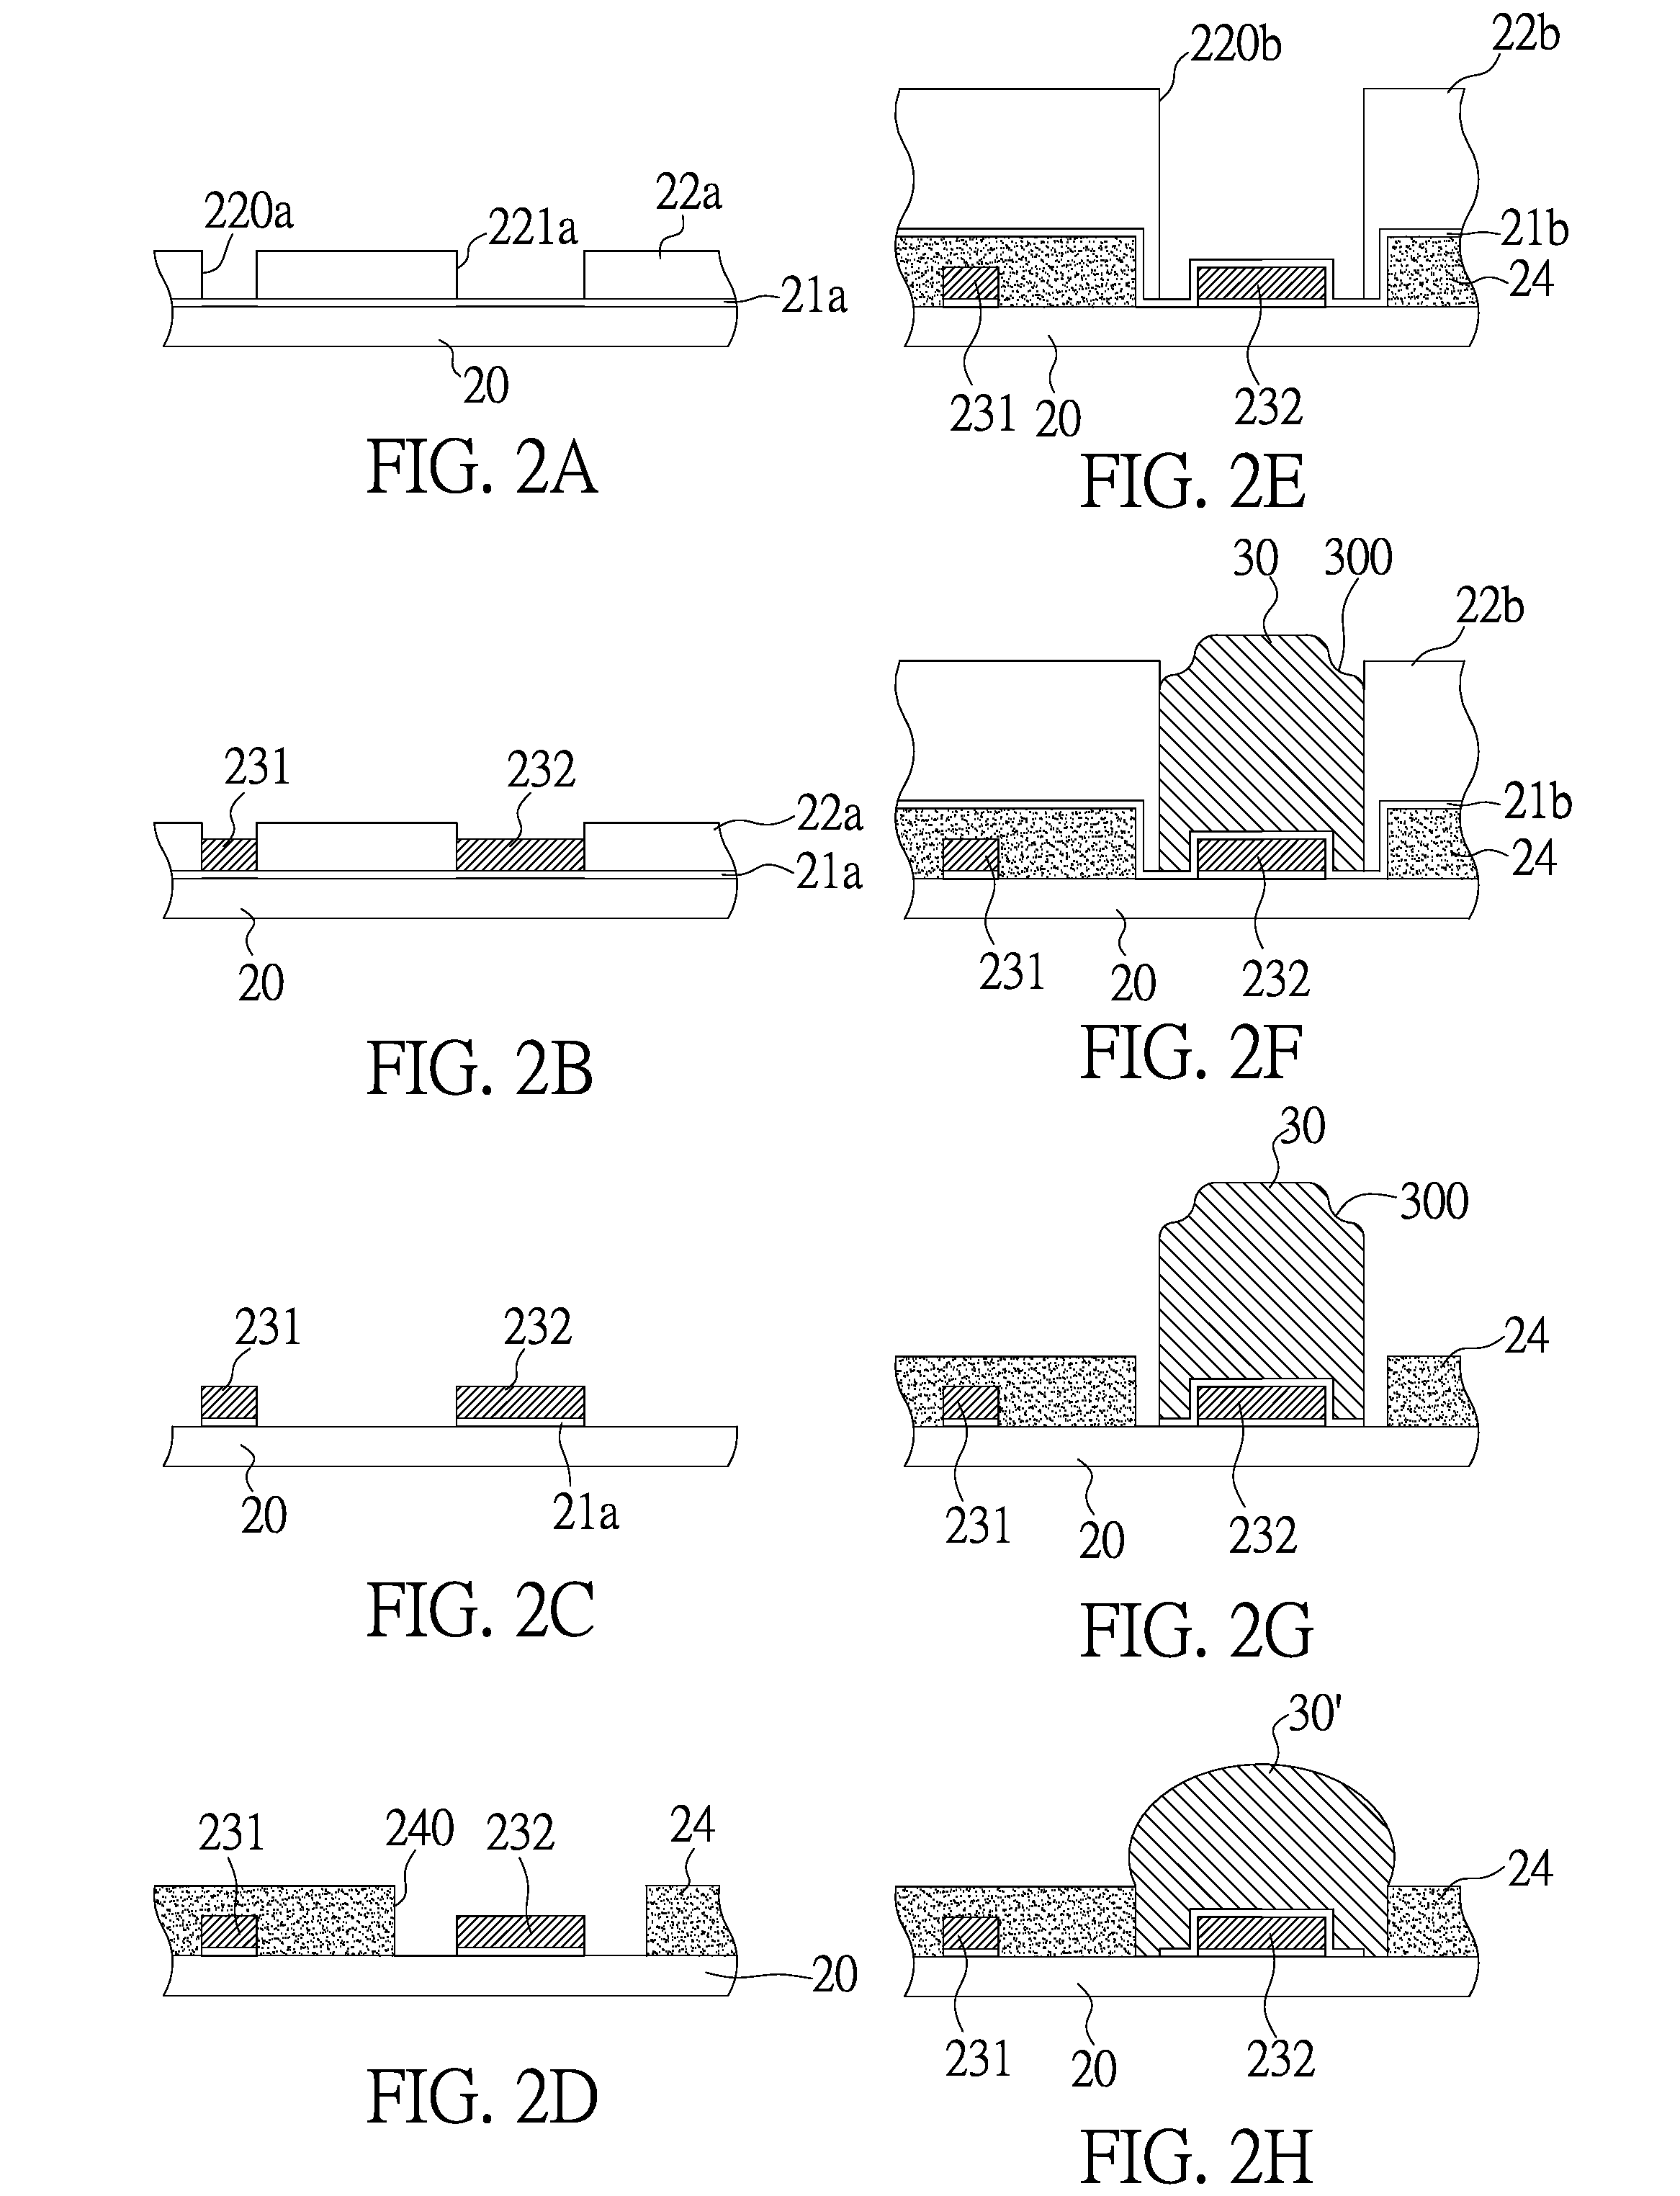 Packaging substrate having electrical connection structure and method for fabricating the same